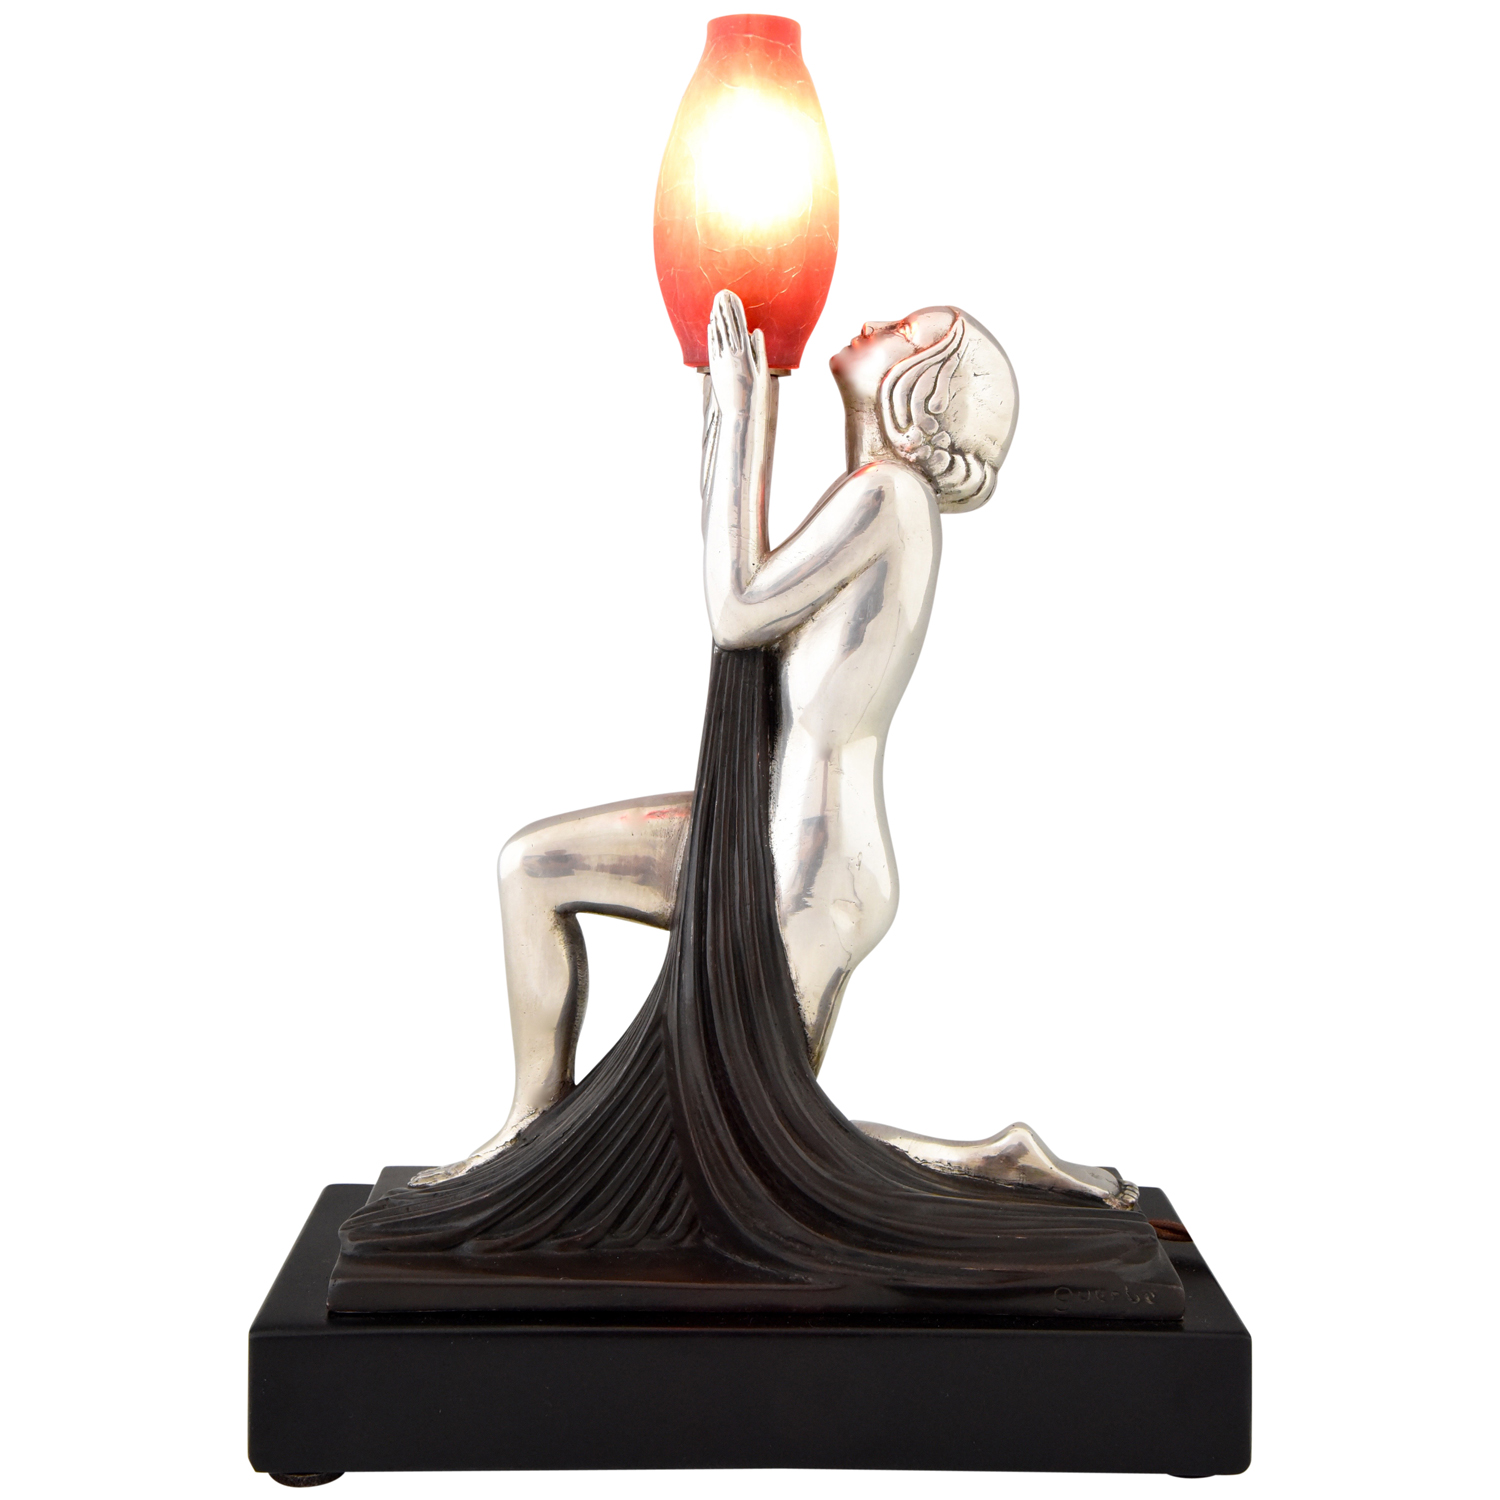 Art Deco silvered bronze lamp with nude